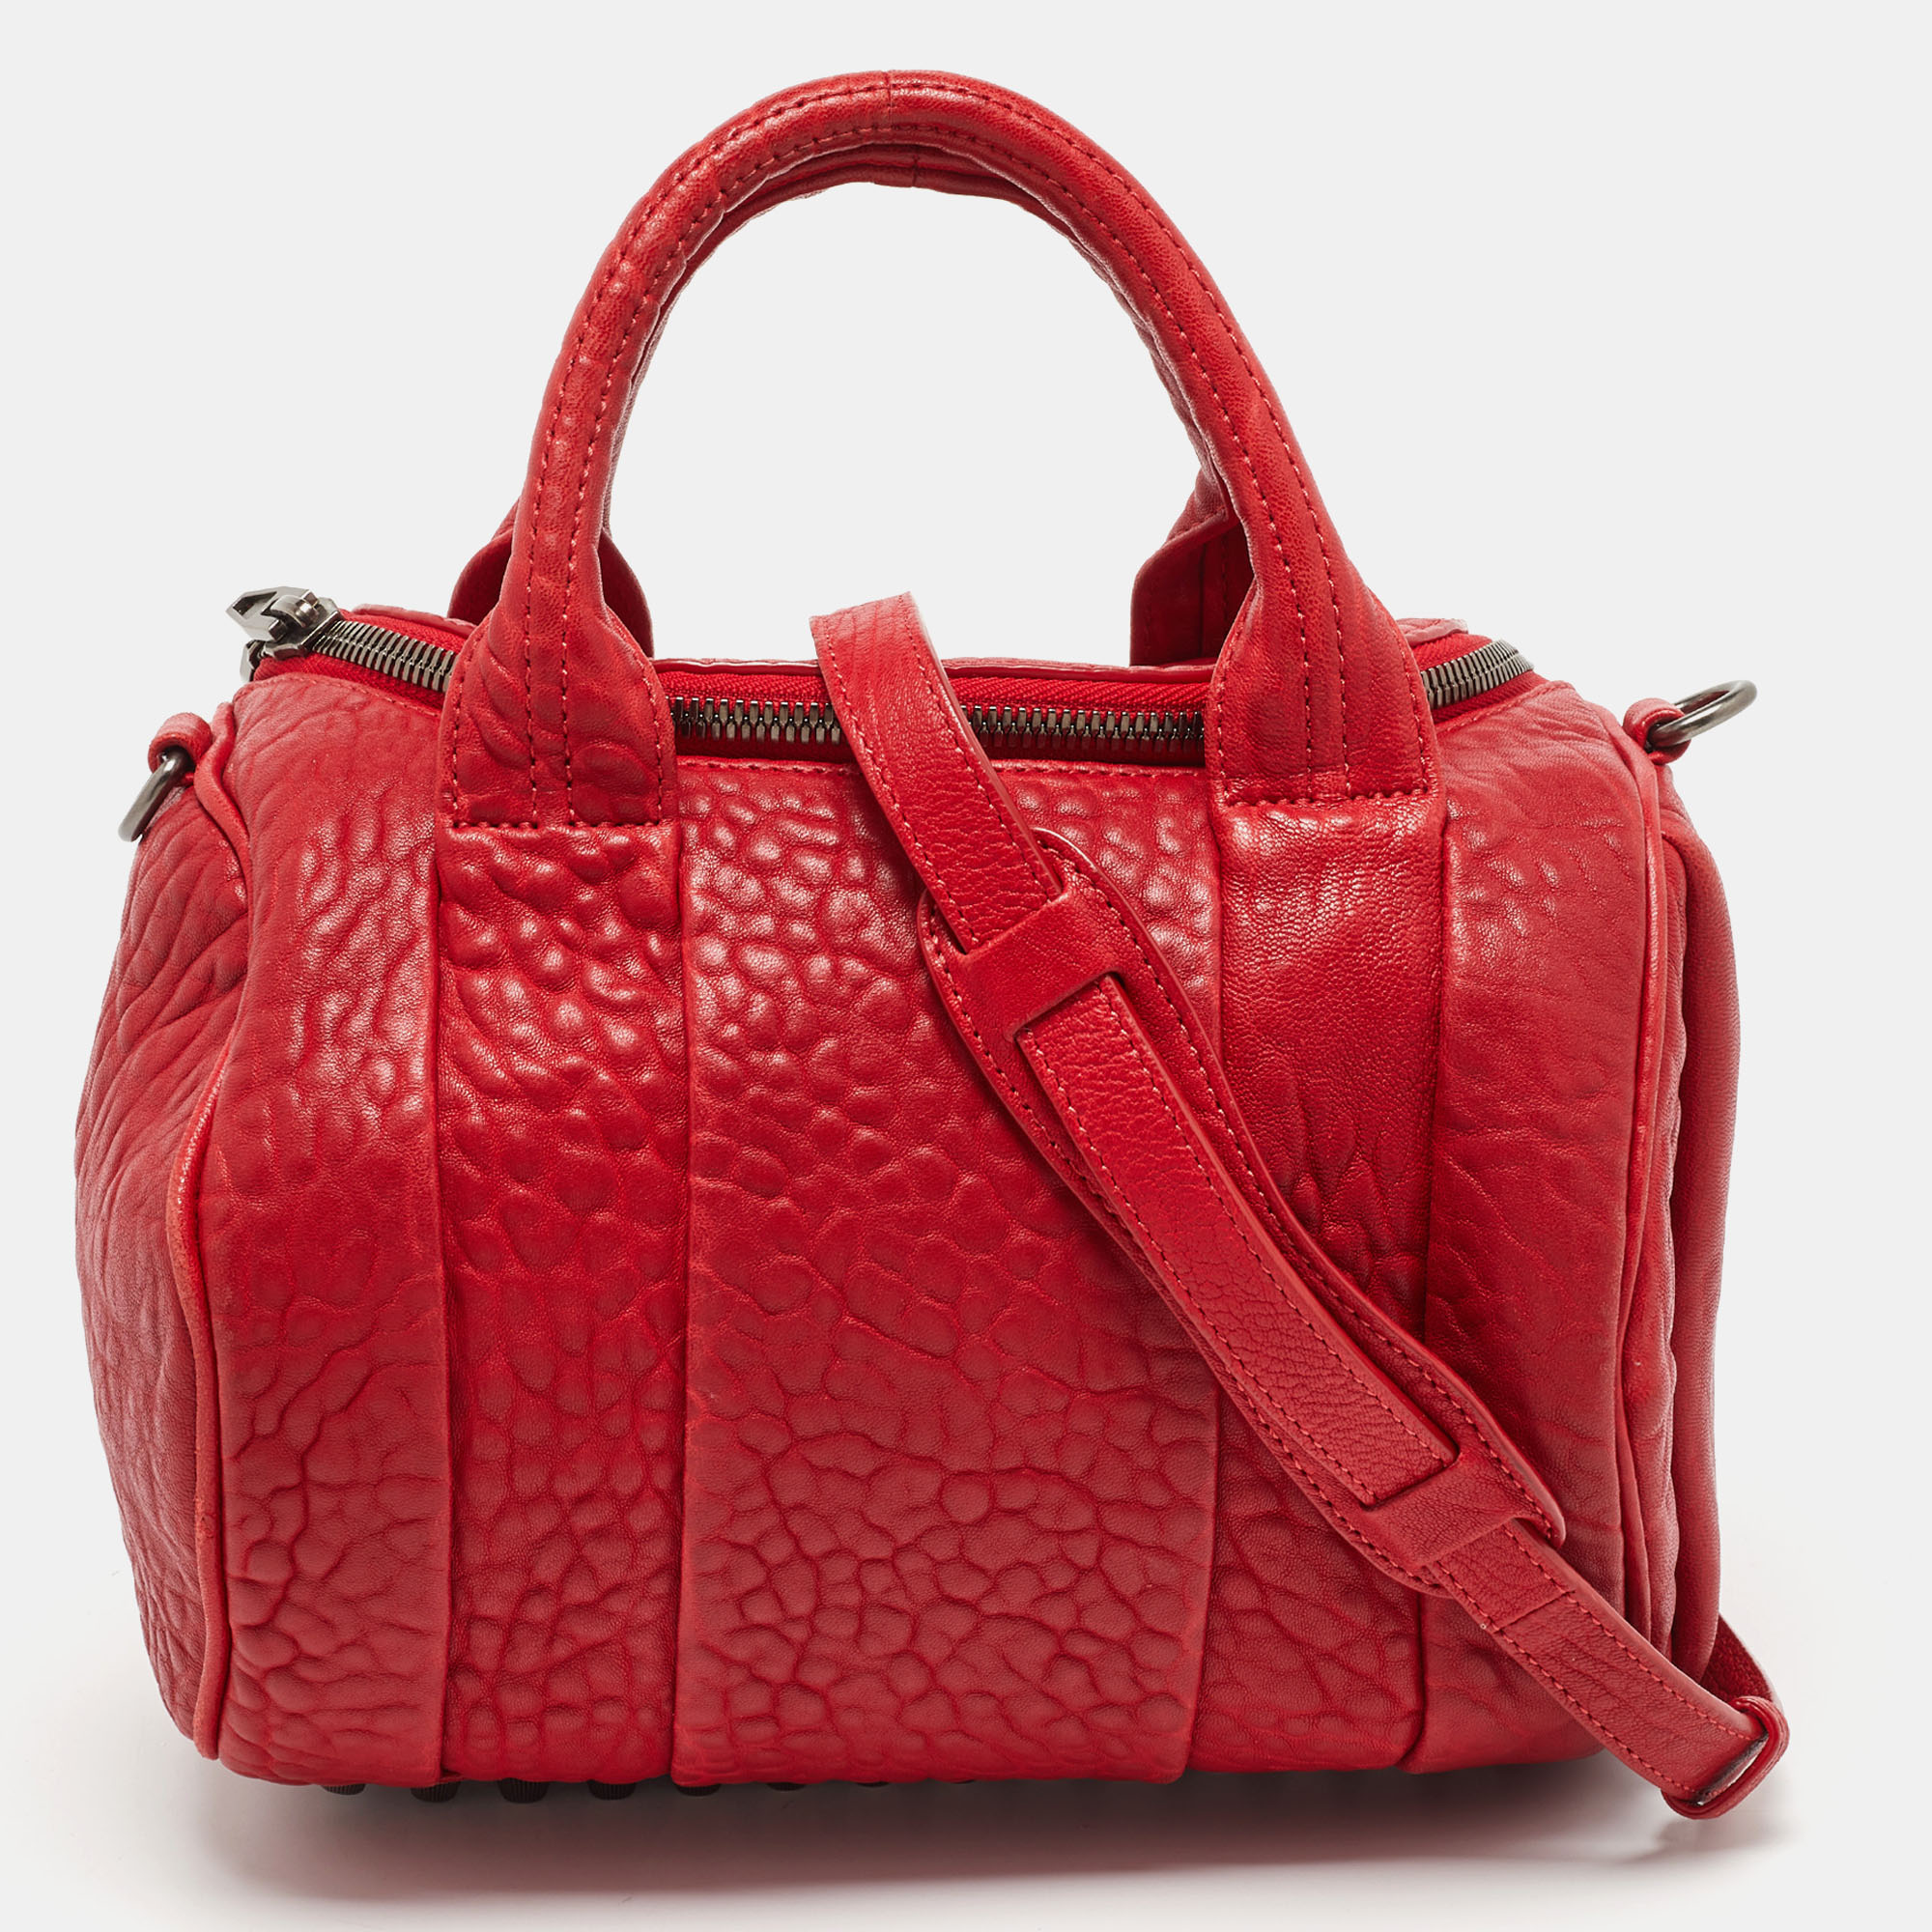 Pre-owned Alexander Wang Red Textured Leather Rocco Bag